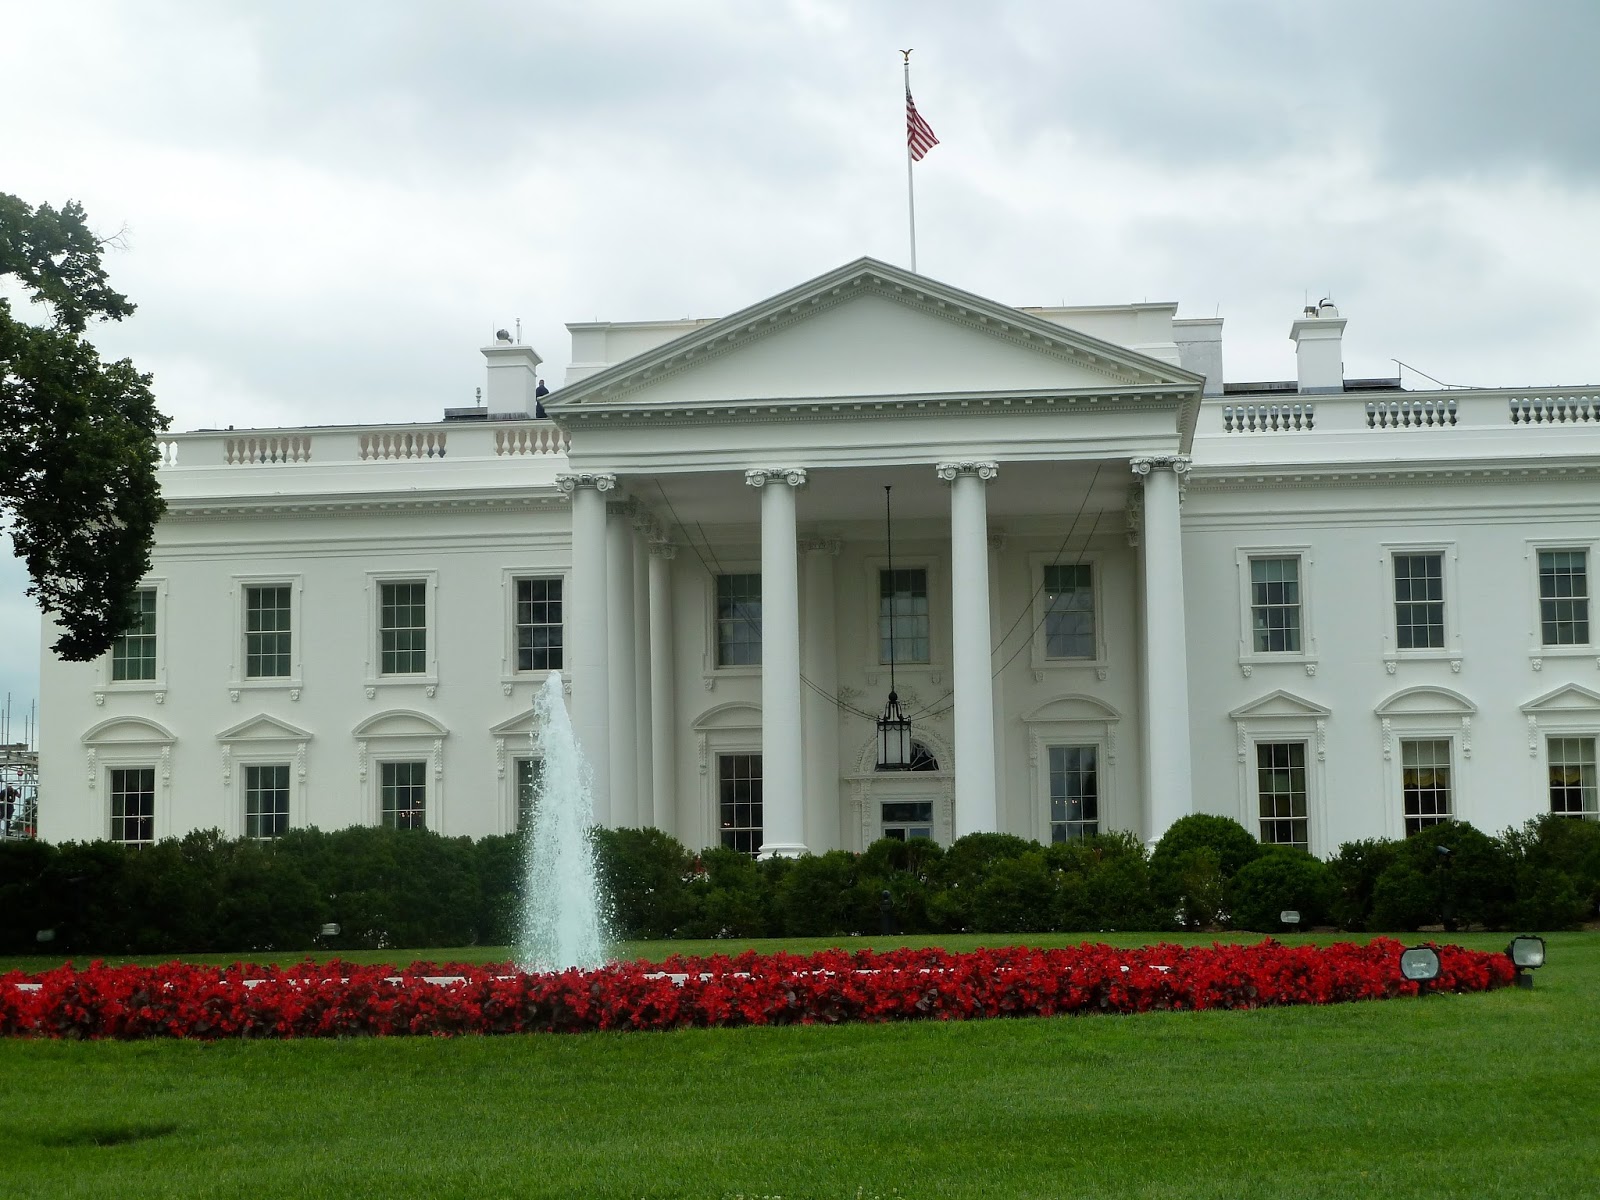 A Foodie's Joy: Visiting The White House and National Memorials - Day 2 ...